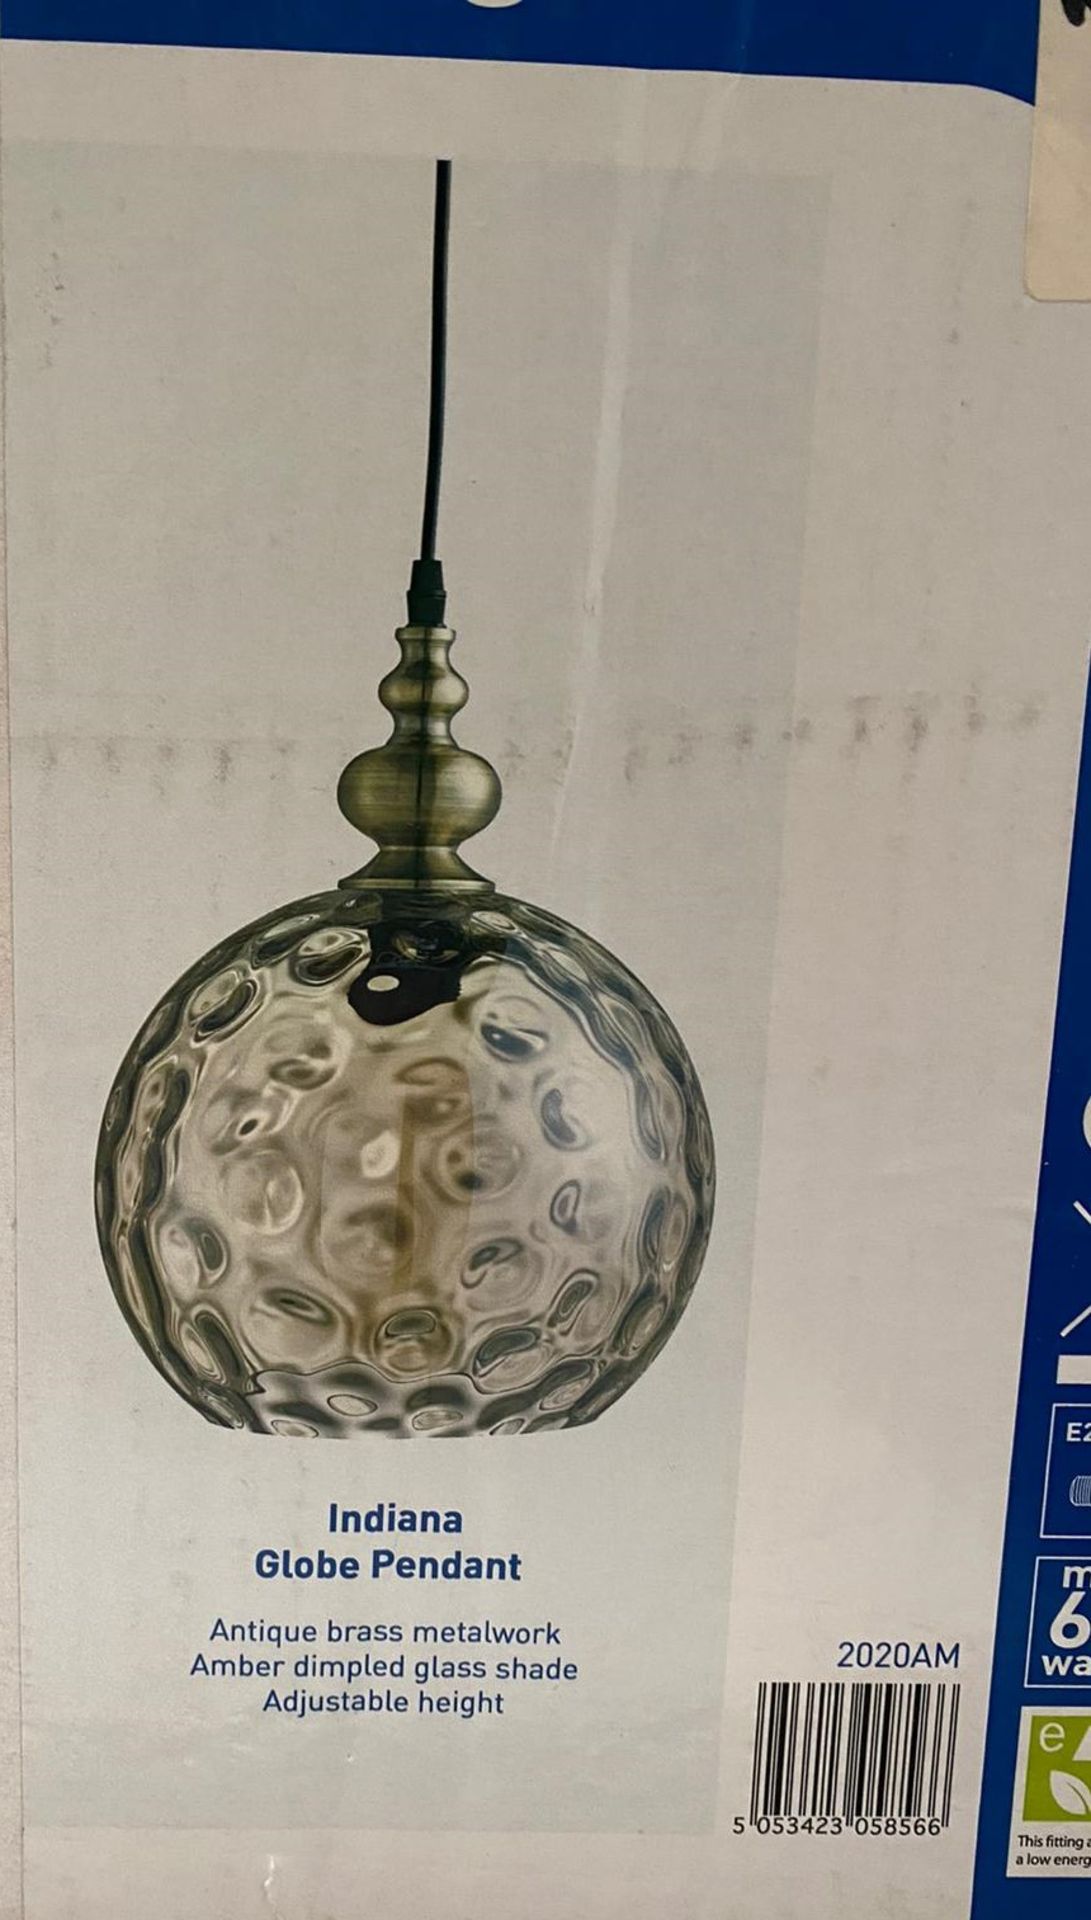 1 x Indiana Globe Pendant in antique brass - Ref: 2020AM - New And Boxed Stock - RRP: £80 - Image 3 of 4